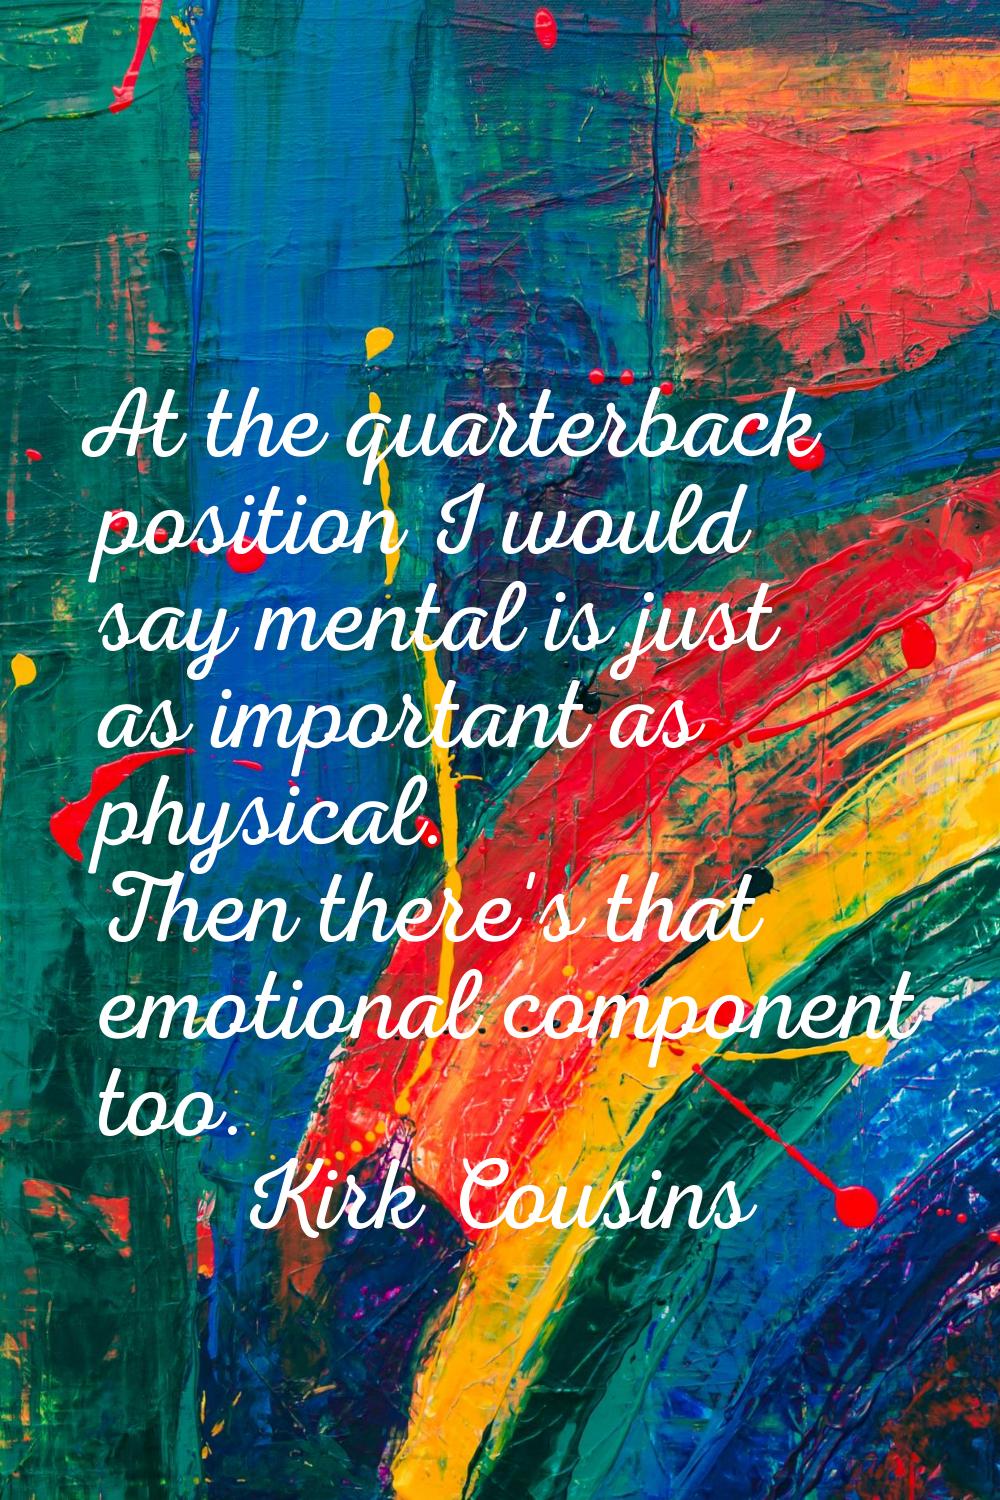 At the quarterback position I would say mental is just as important as physical. Then there's that 